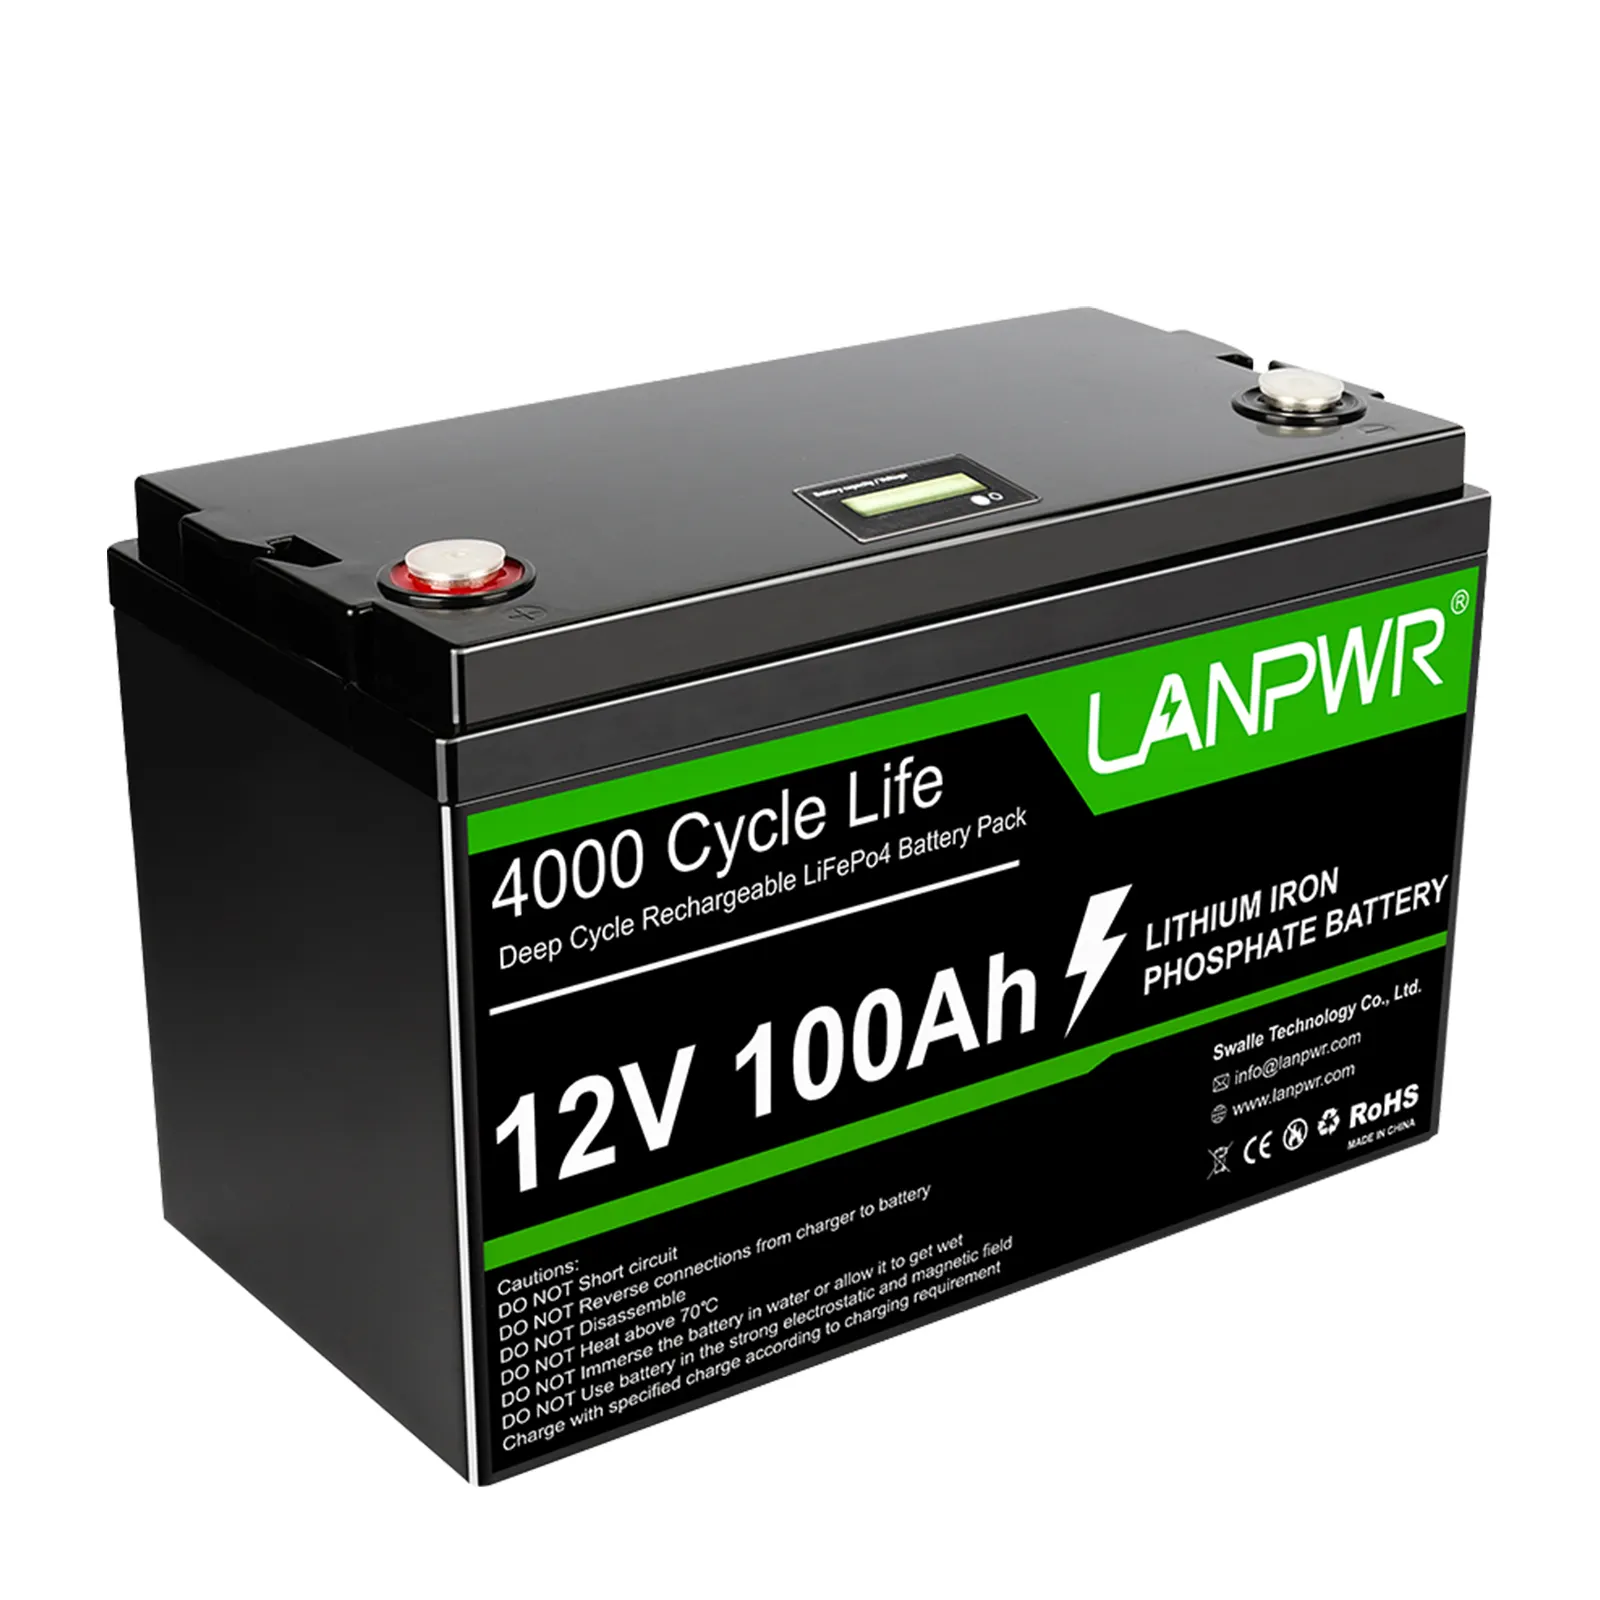 lifepo4 5 years warranty 12v 100ah battery for RV solar 12 volt lithium battery 20 Up to 4000 Deep Cycles